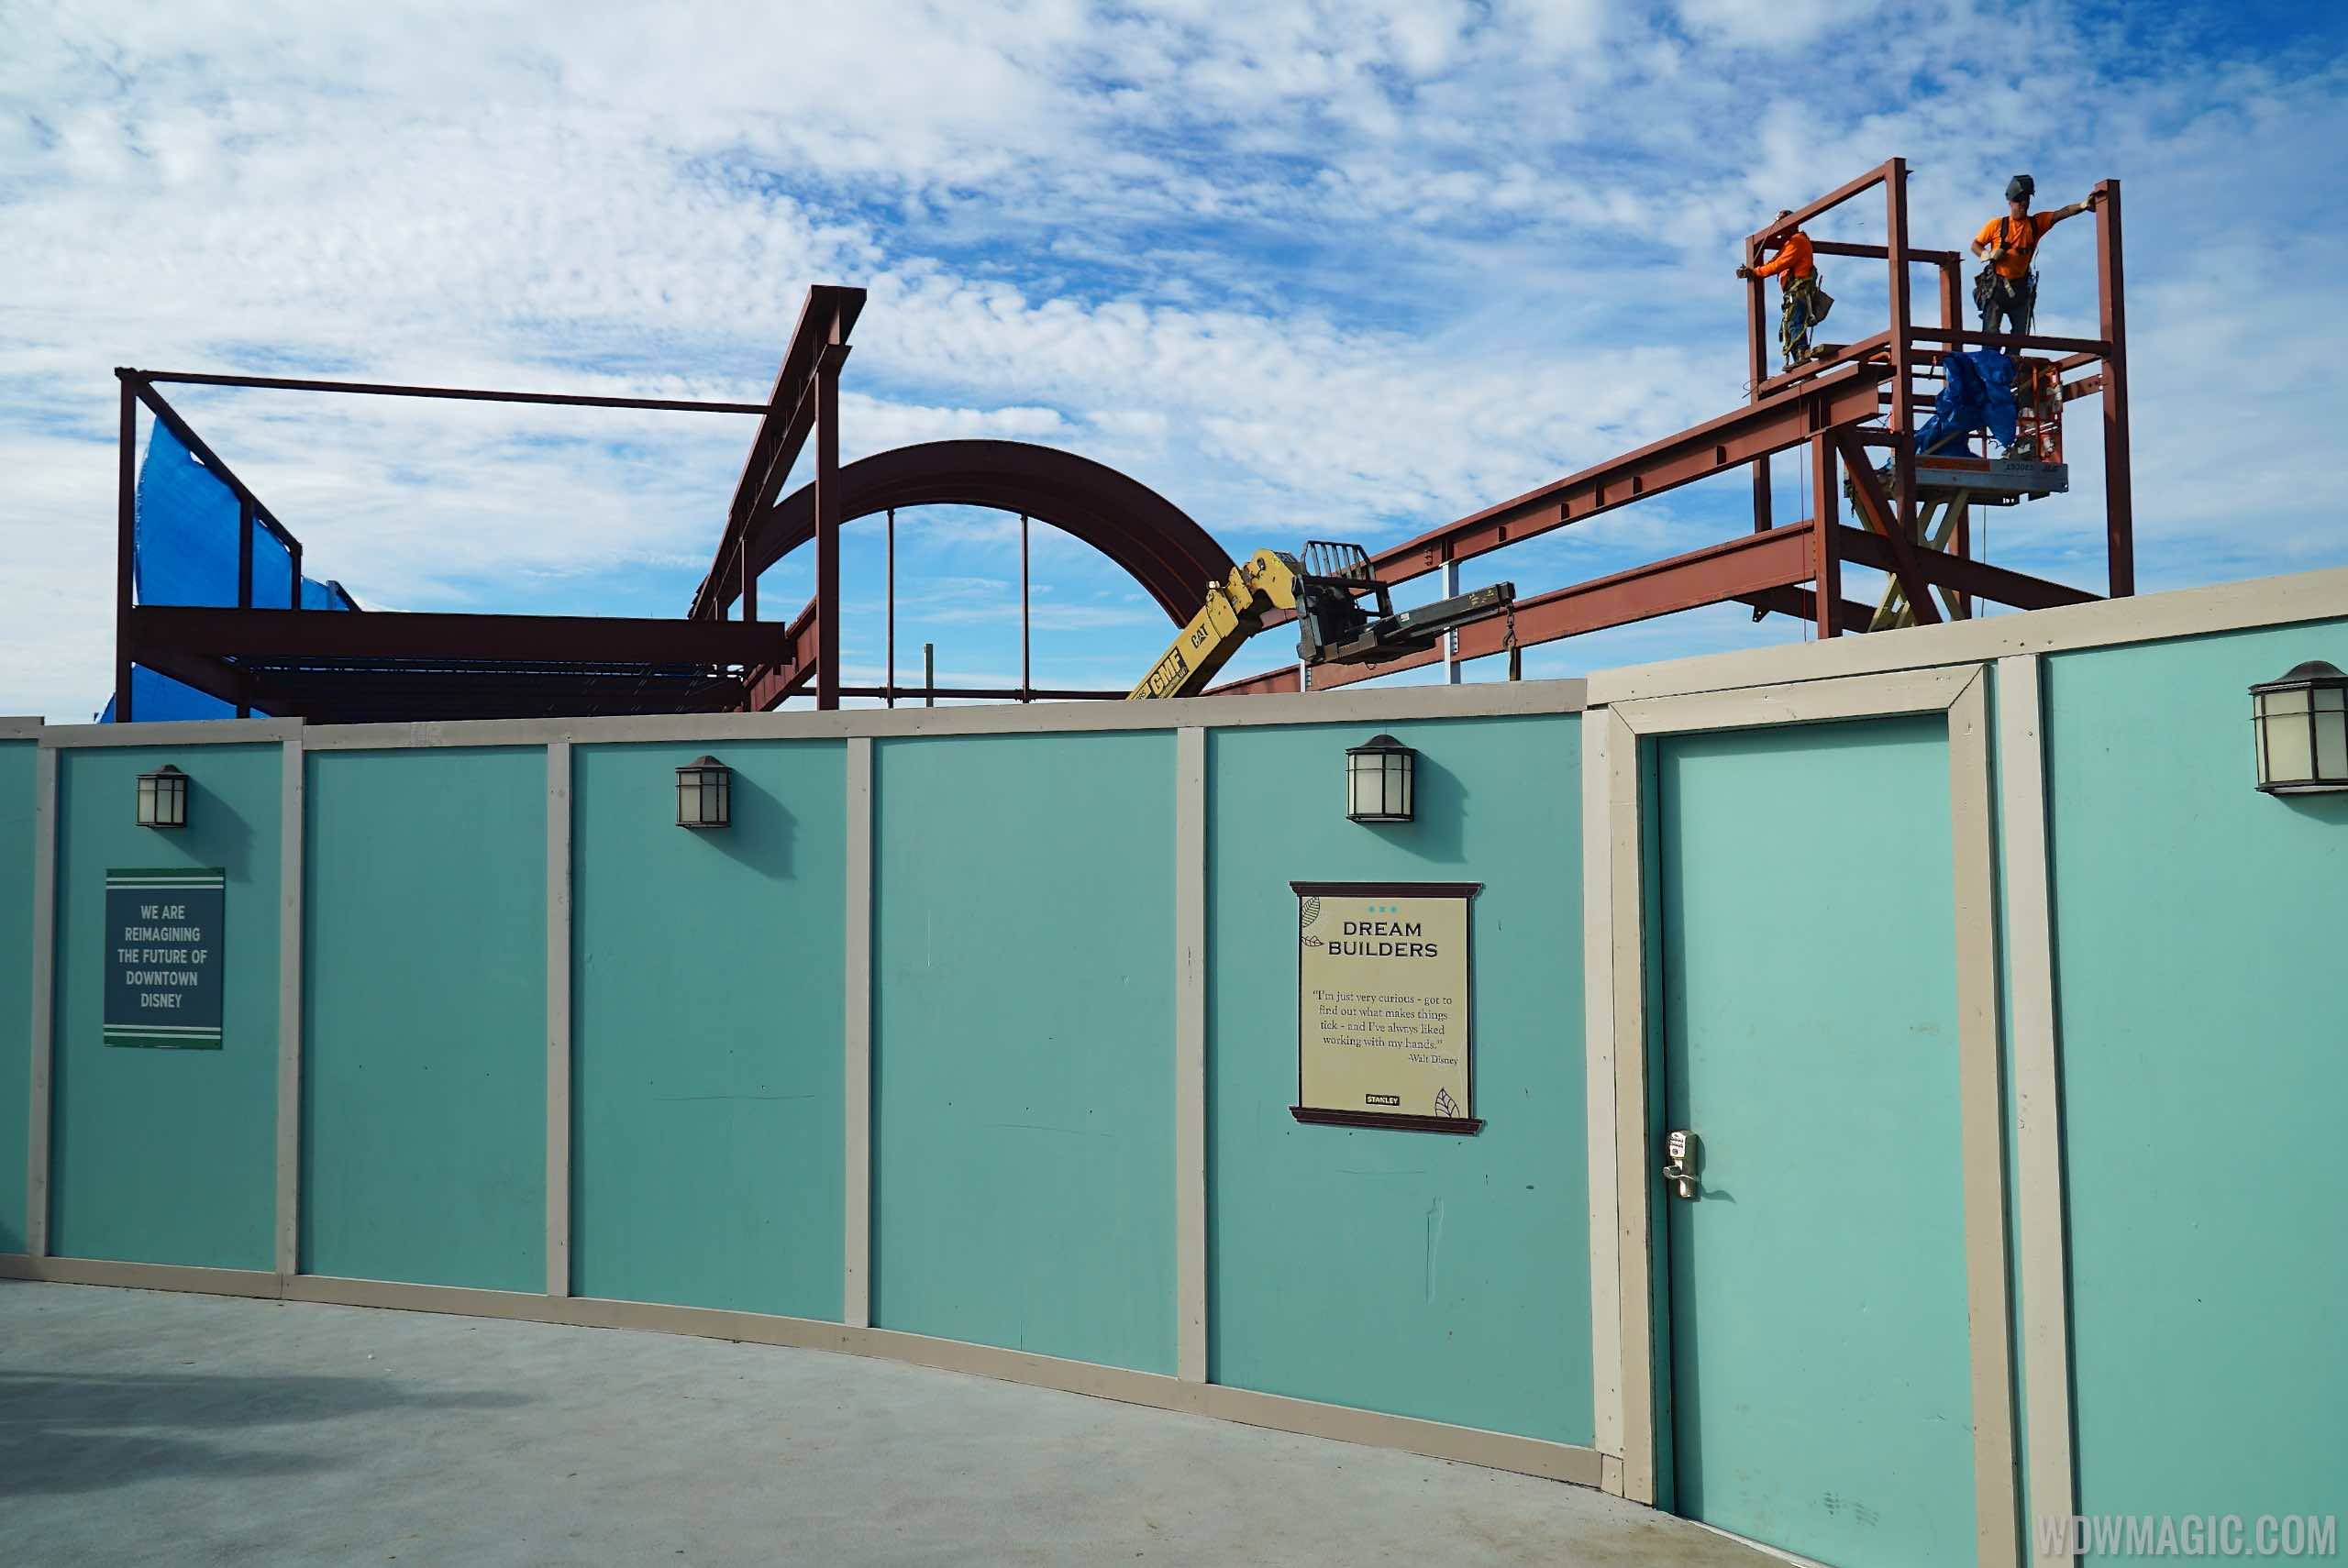 PHOTOS - The Hangar bar at Disney Springs comes to life as structural steel rises